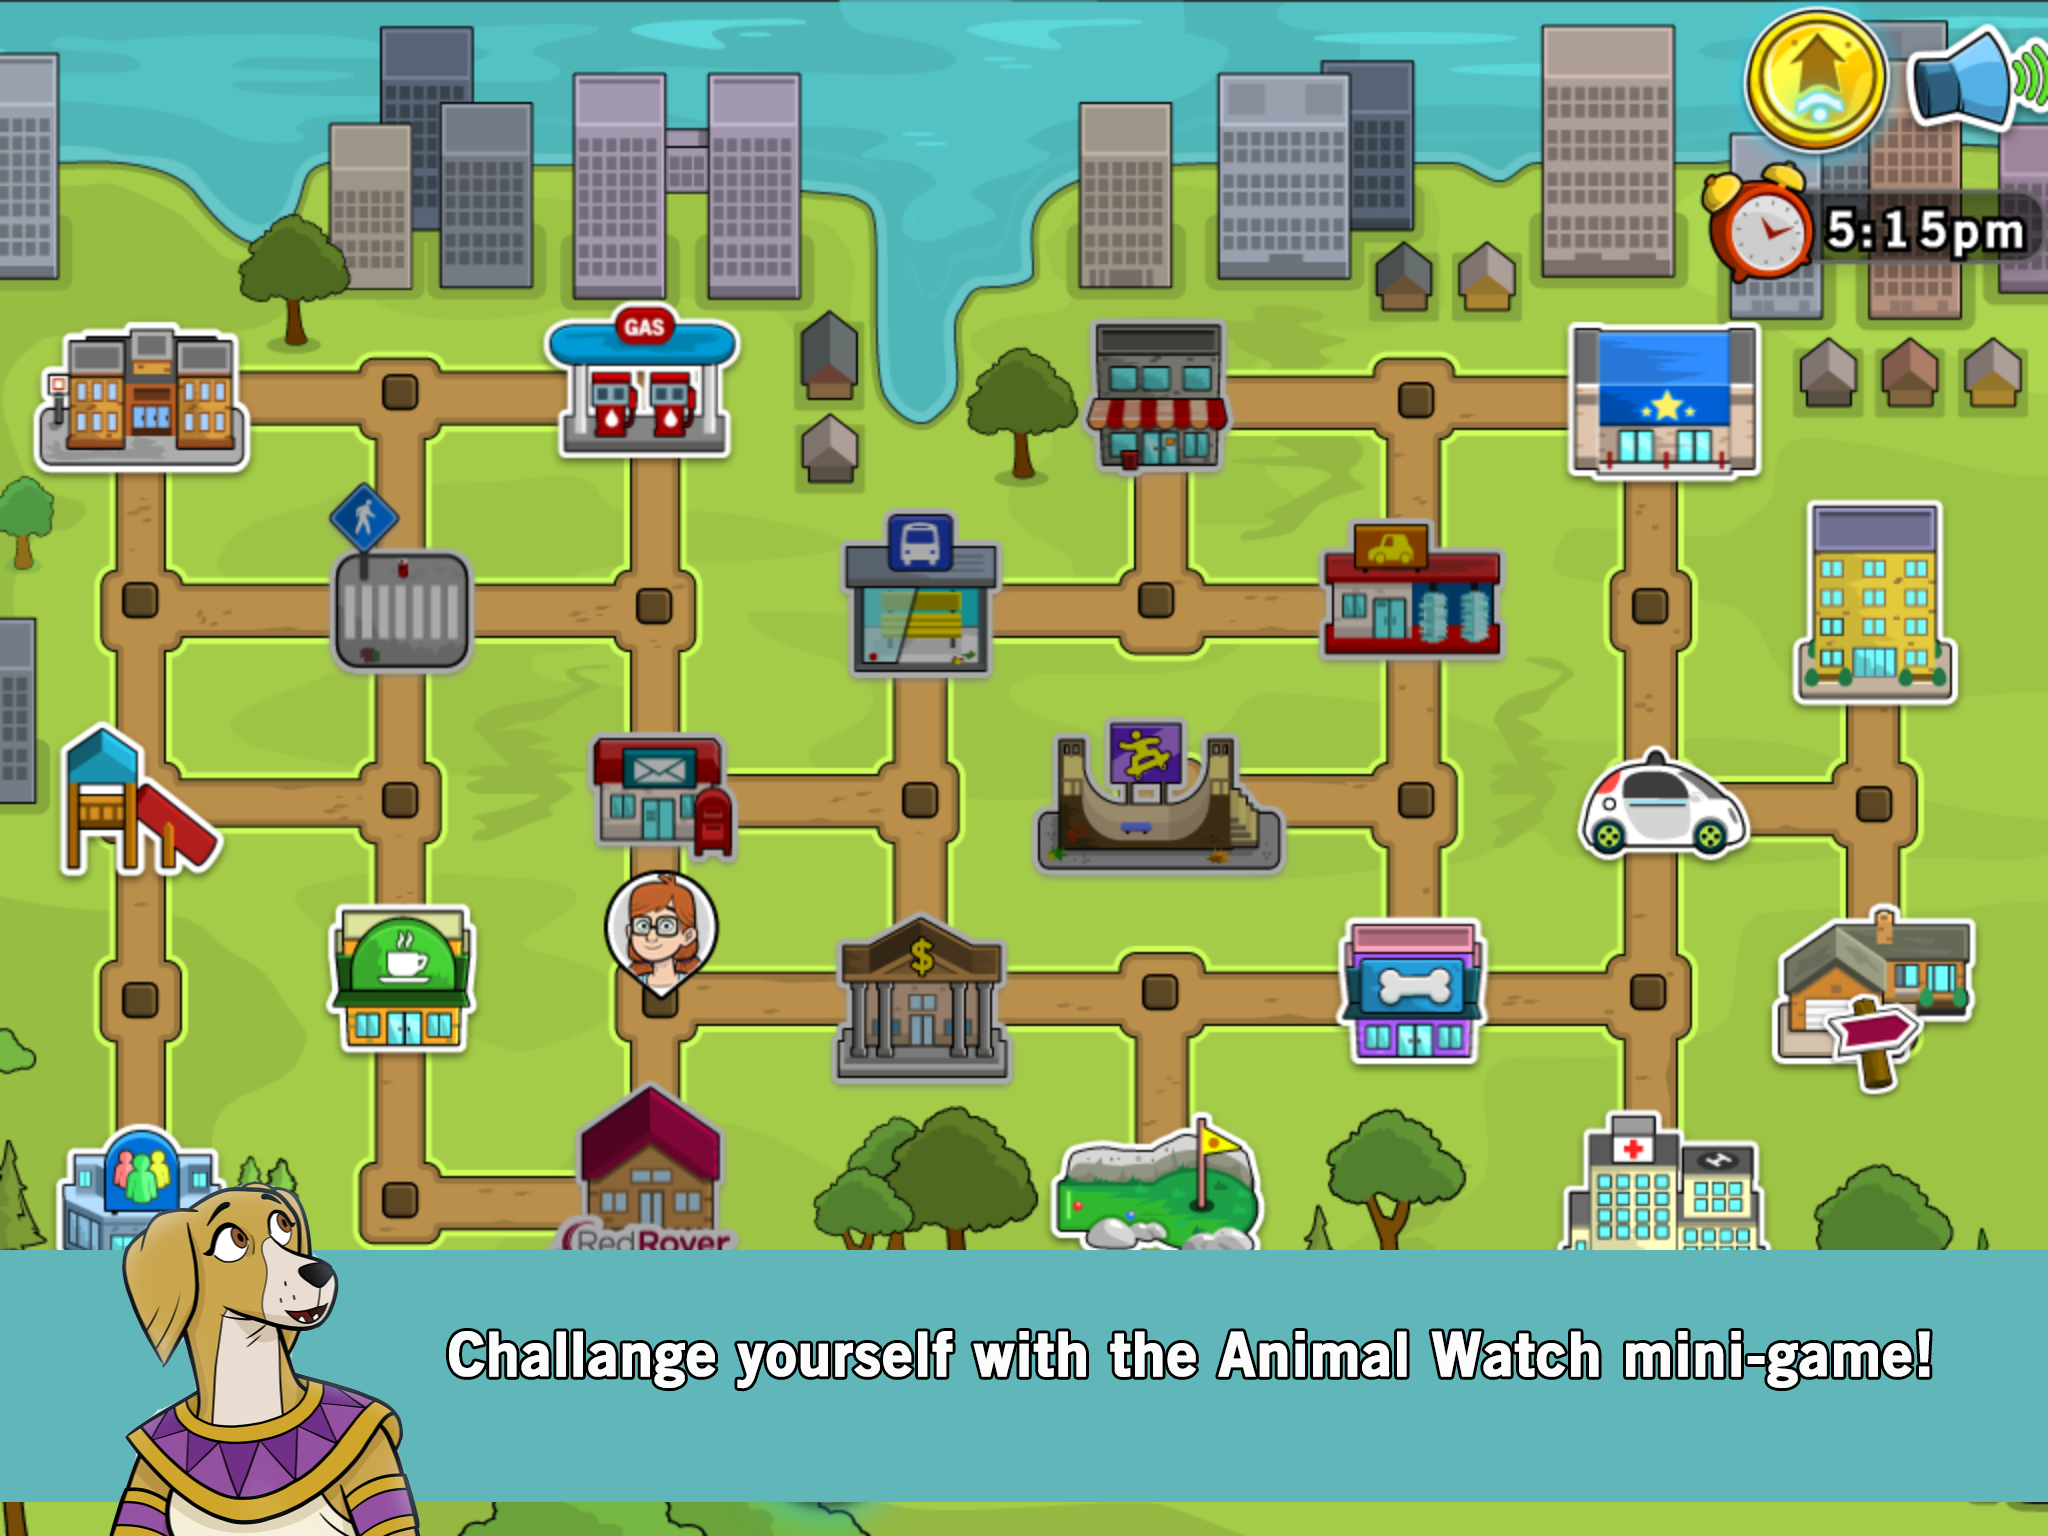 The Animal Watch interactive game